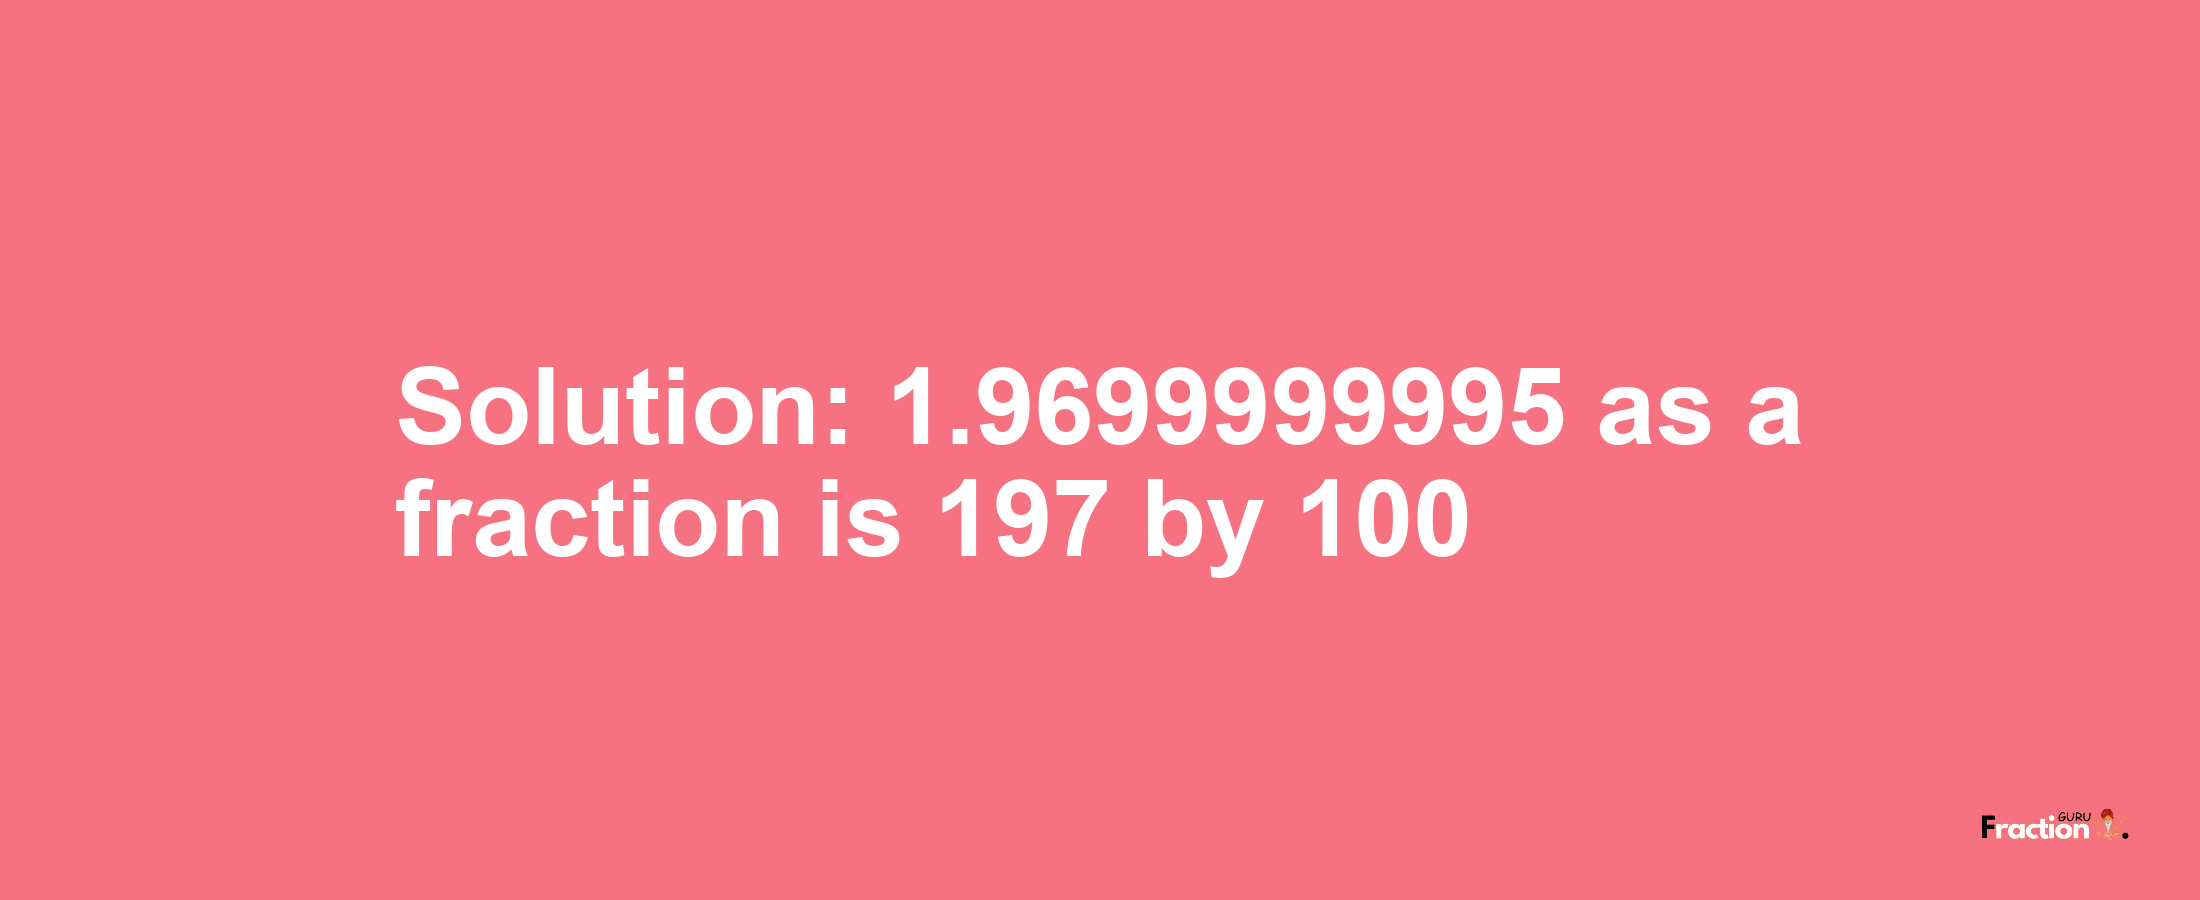 Solution:1.9699999995 as a fraction is 197/100